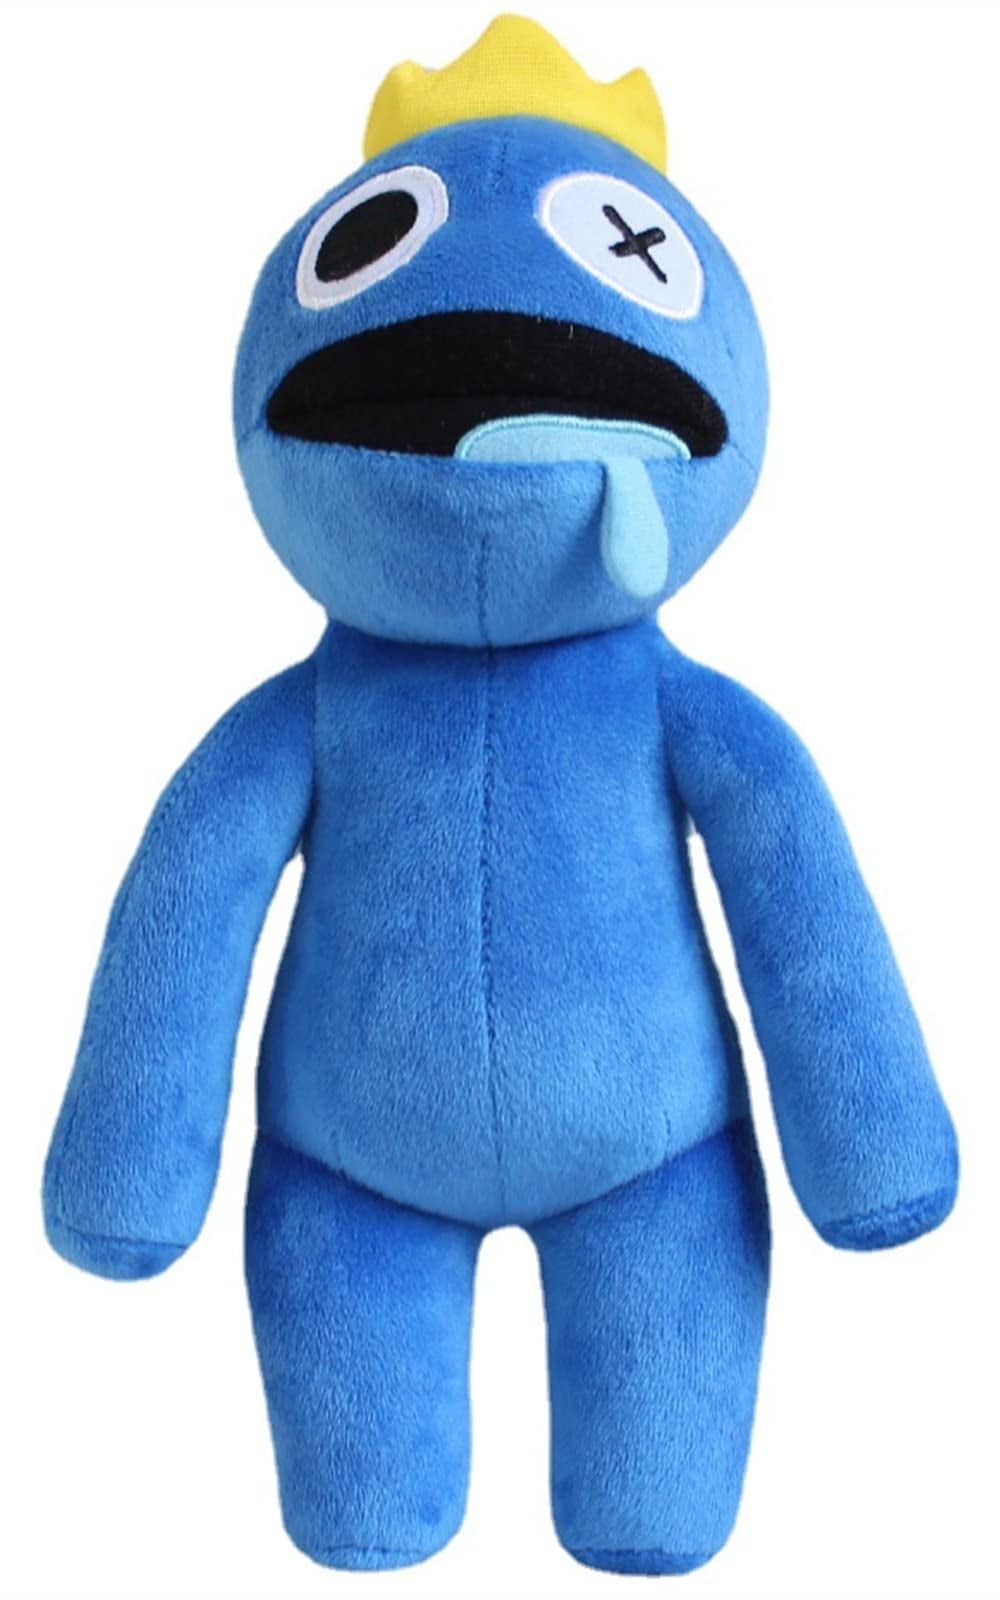 Baby Products Online - hirsrian Rainbow Friends Plush, Blue